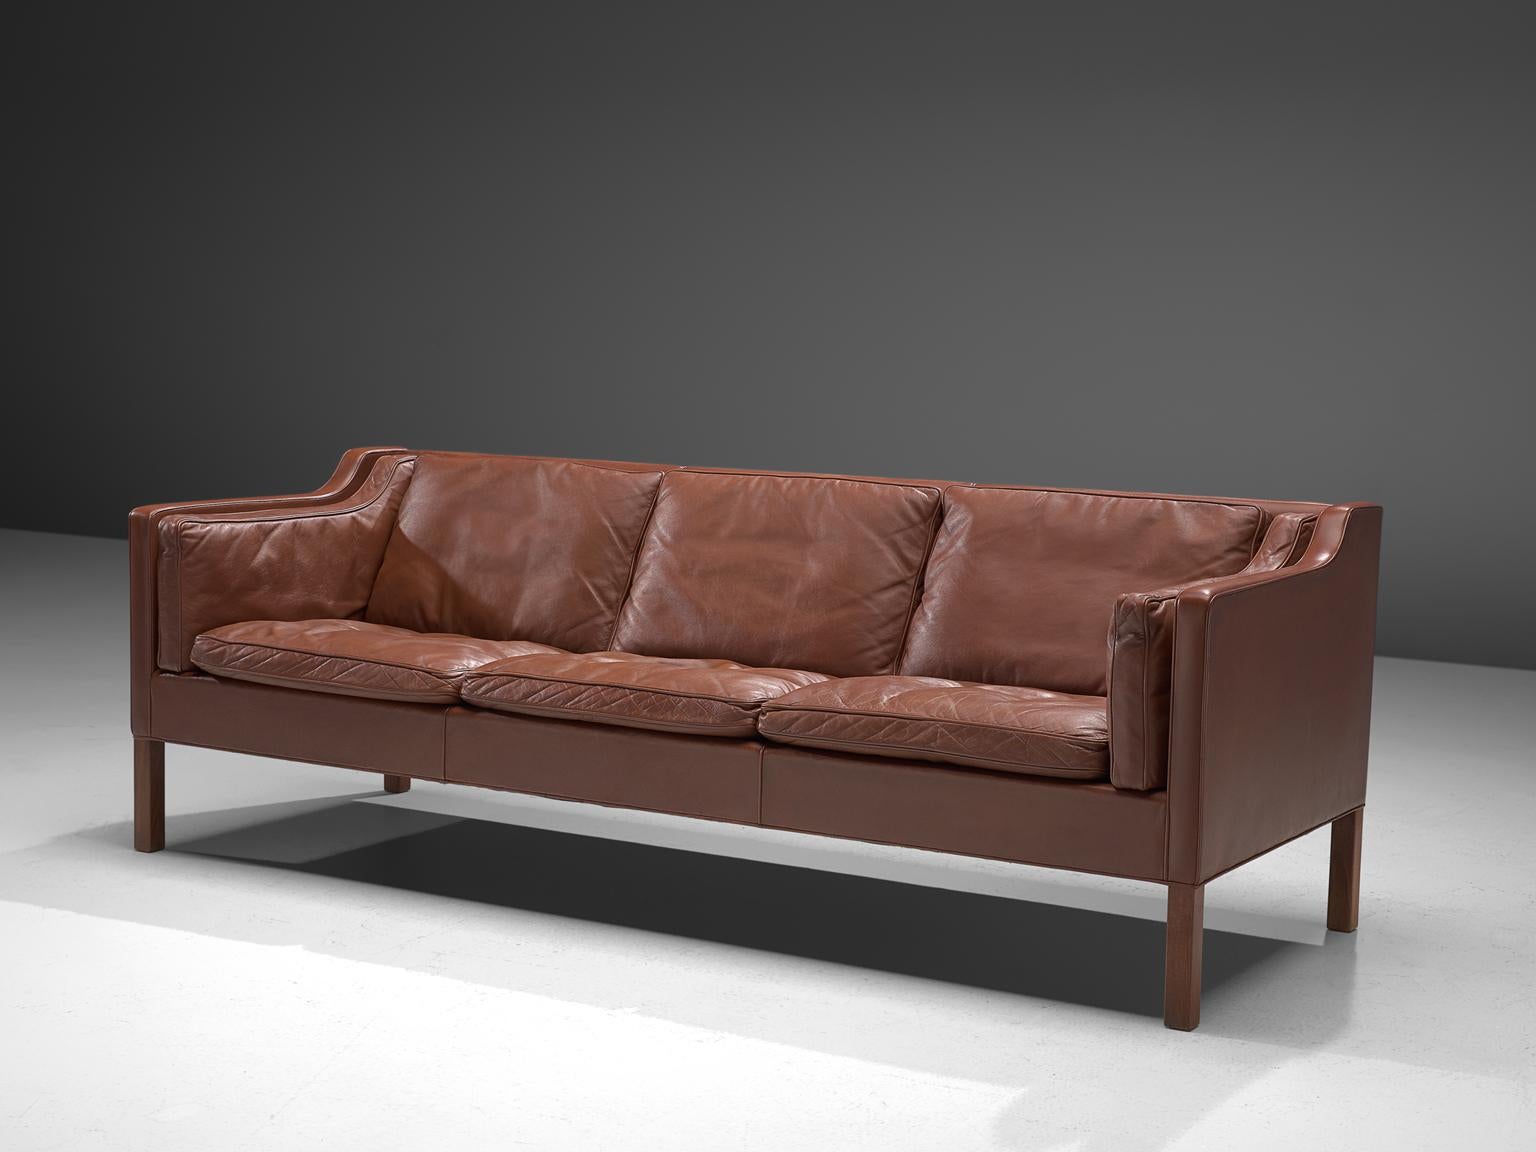 Børge Mogensen for Fredericia Stolefabrik, 3-seater sofa BM2213, leather and stained oak, Denmark 1962. 

Very well conditioned 3 seater sofa from Børge Mogensen. This model was designed by Mogensen for his own home, in his goal to create the